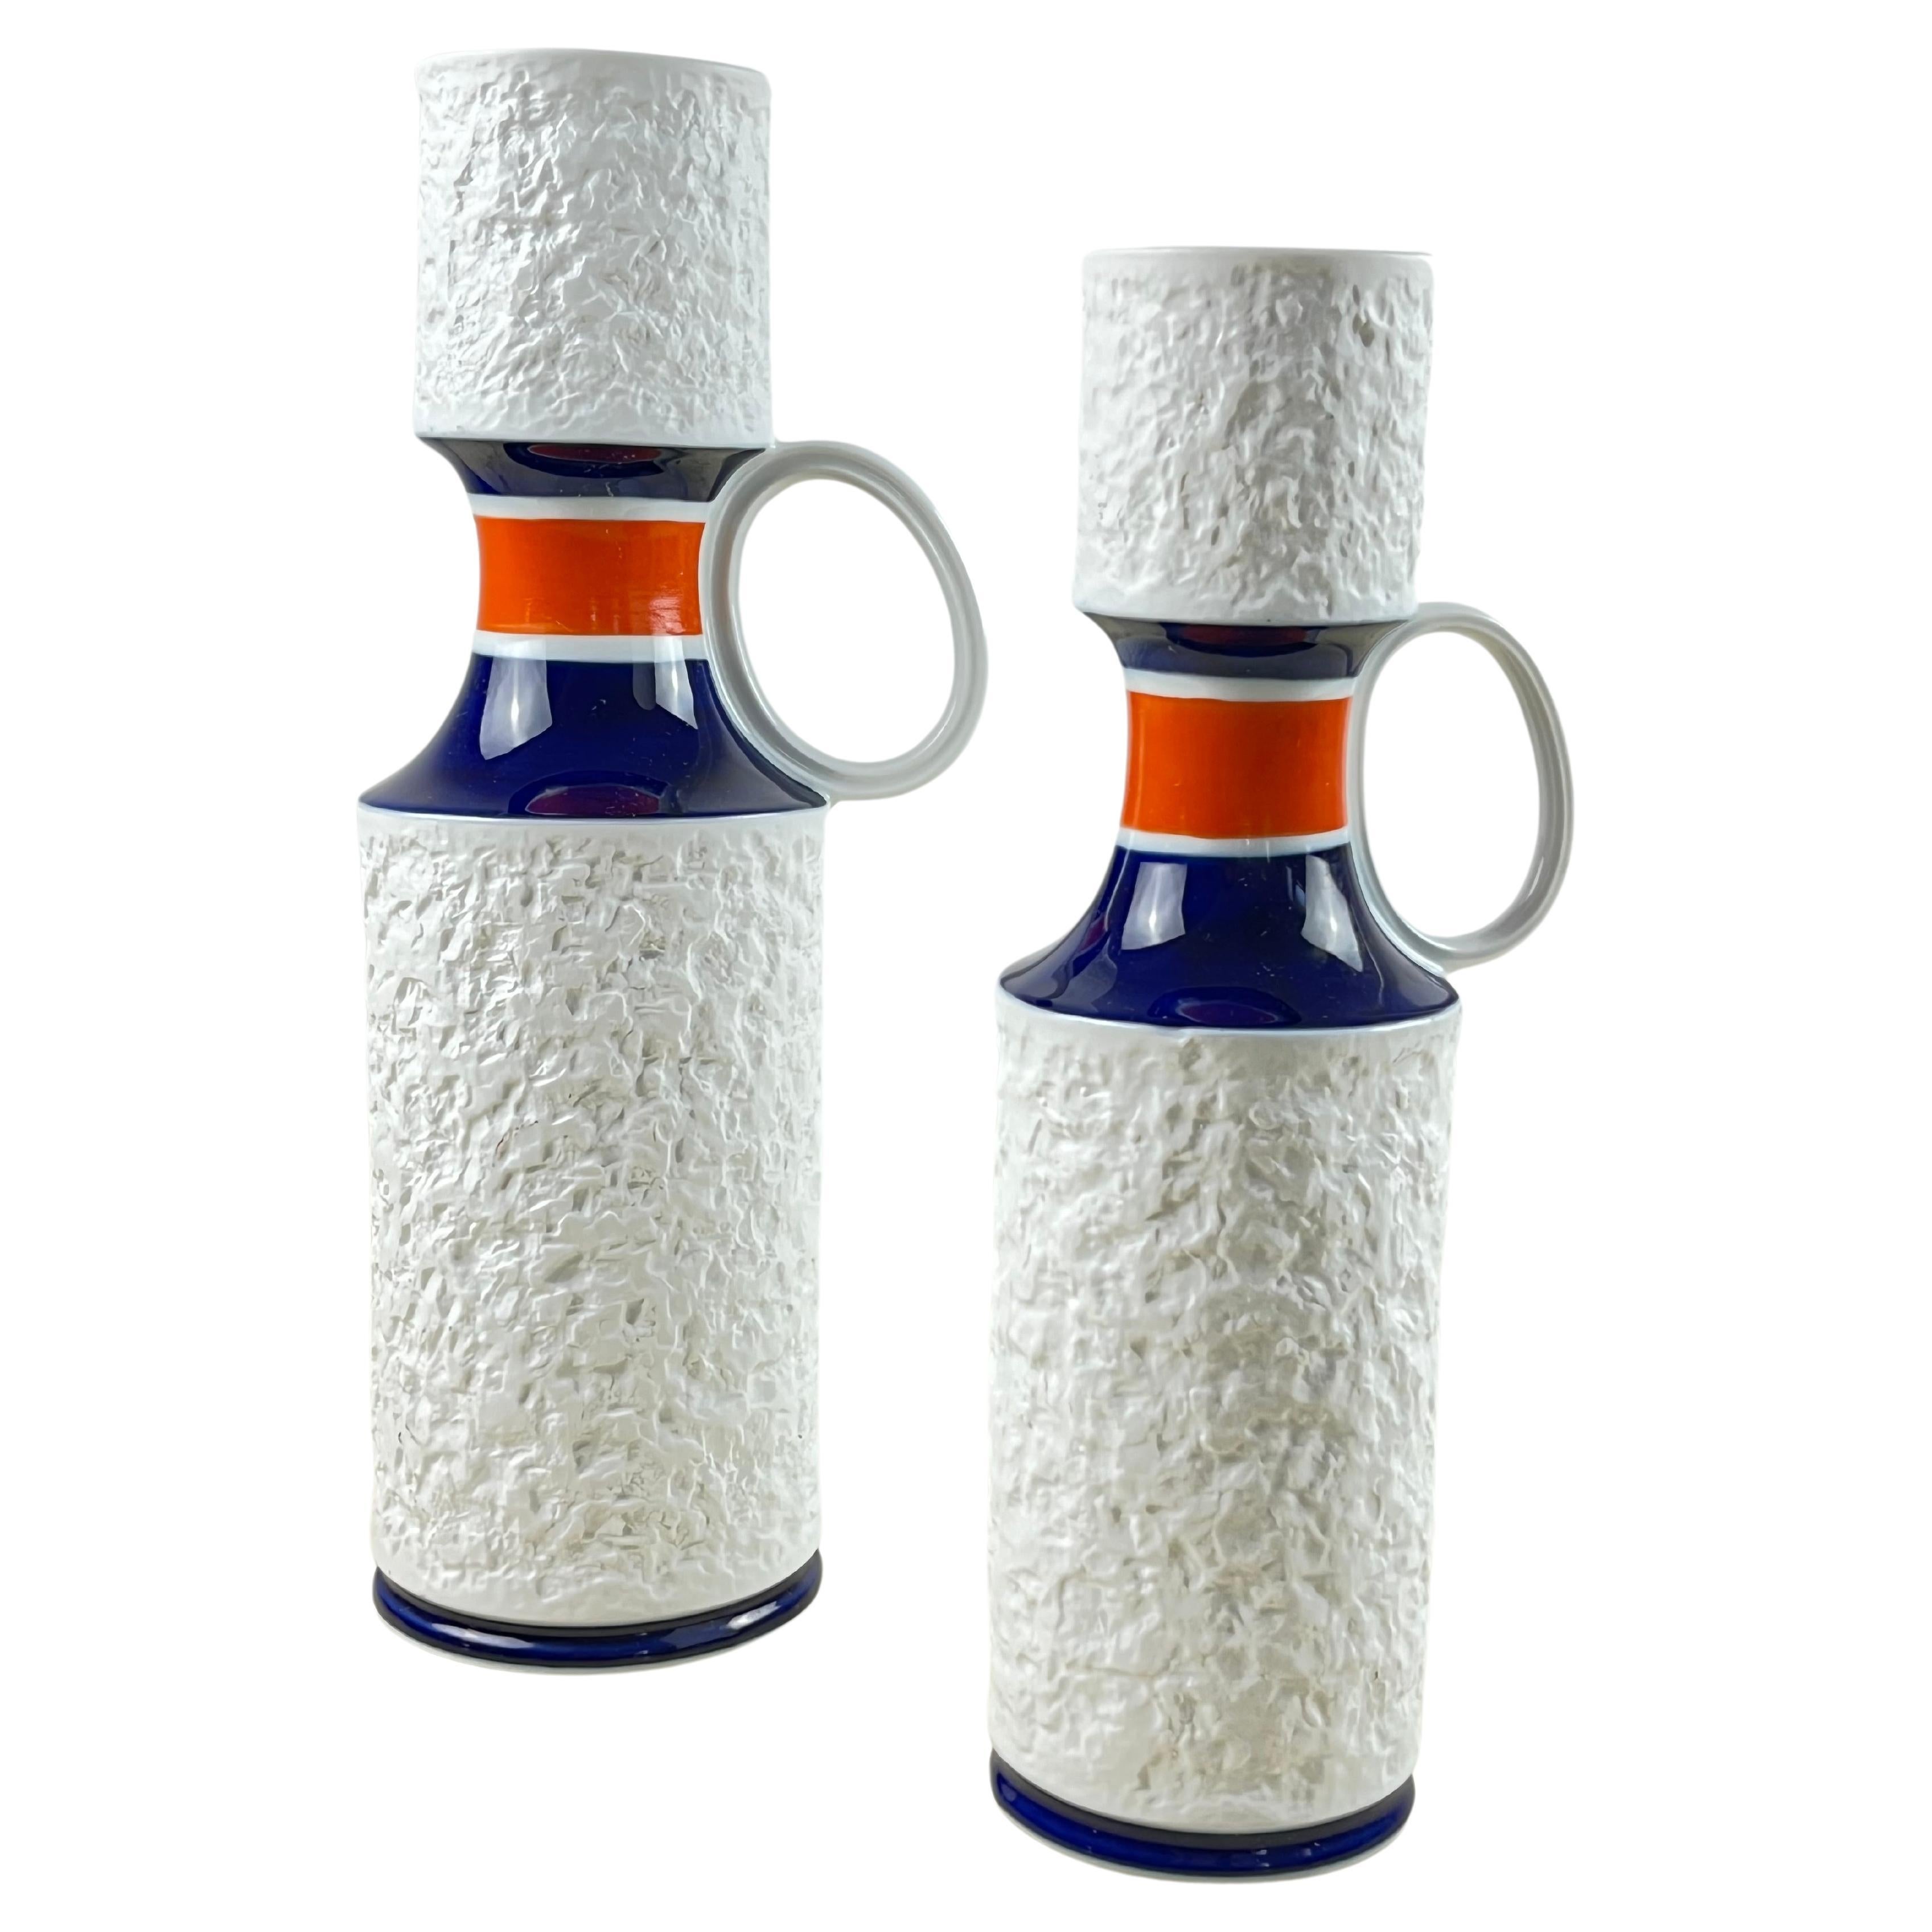 Pair of KPM Biscuit Porcelain Vases, Germany, 1960s For Sale